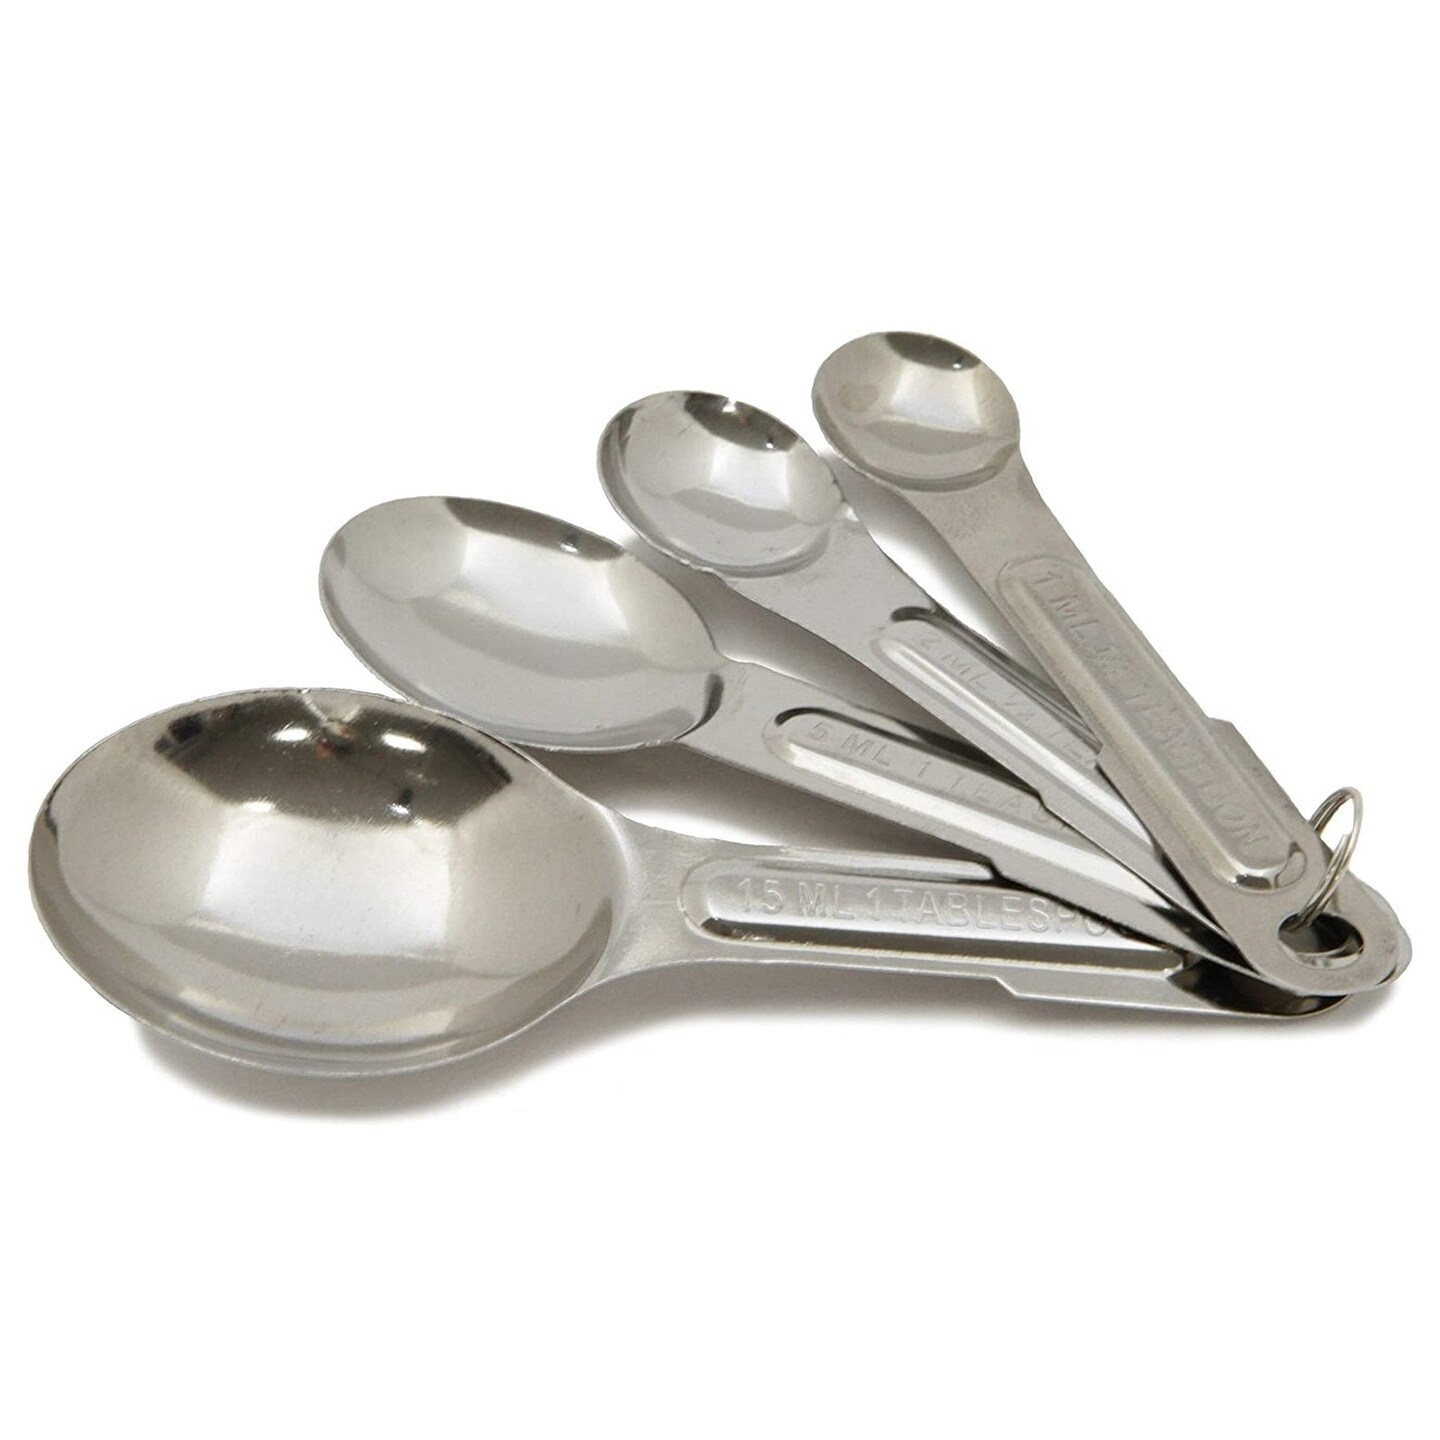 One Tablespoon Measuring Spoon